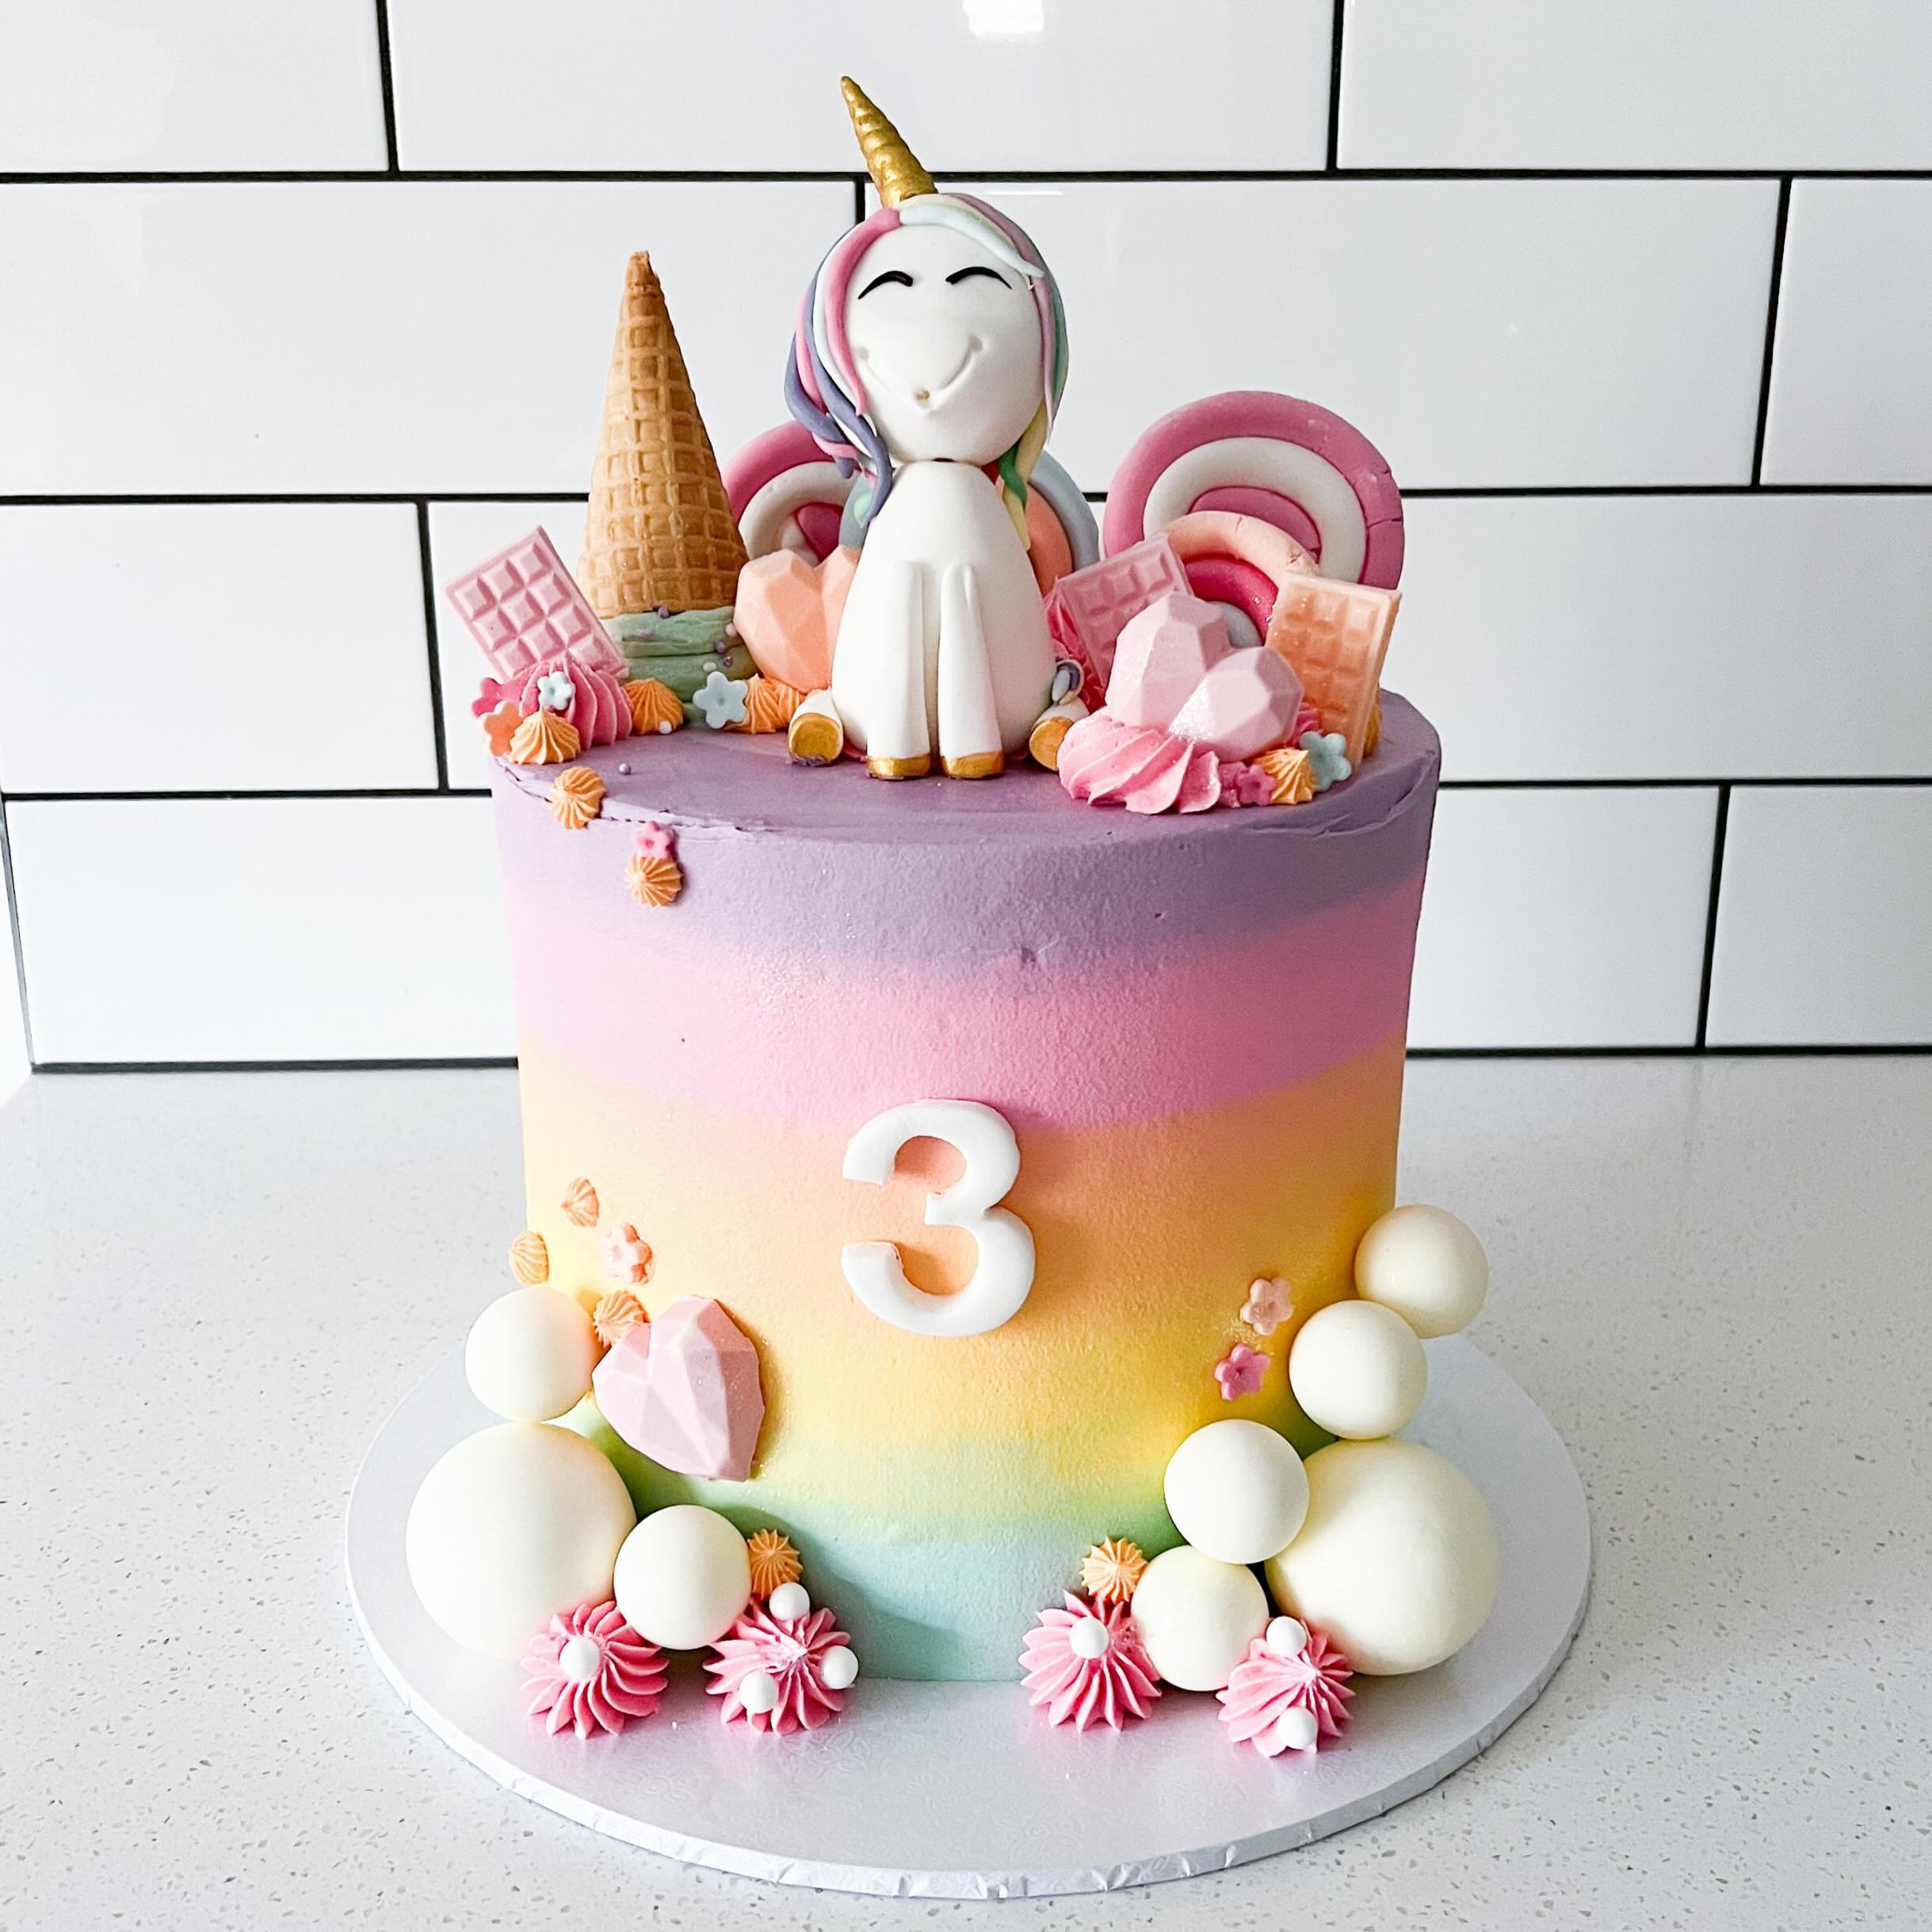 When the request for the cake is to look like &lsquo;something a magical creature vomited up&rsquo; 😍🌈

Fondant unicorn supplied by the customer 🦄